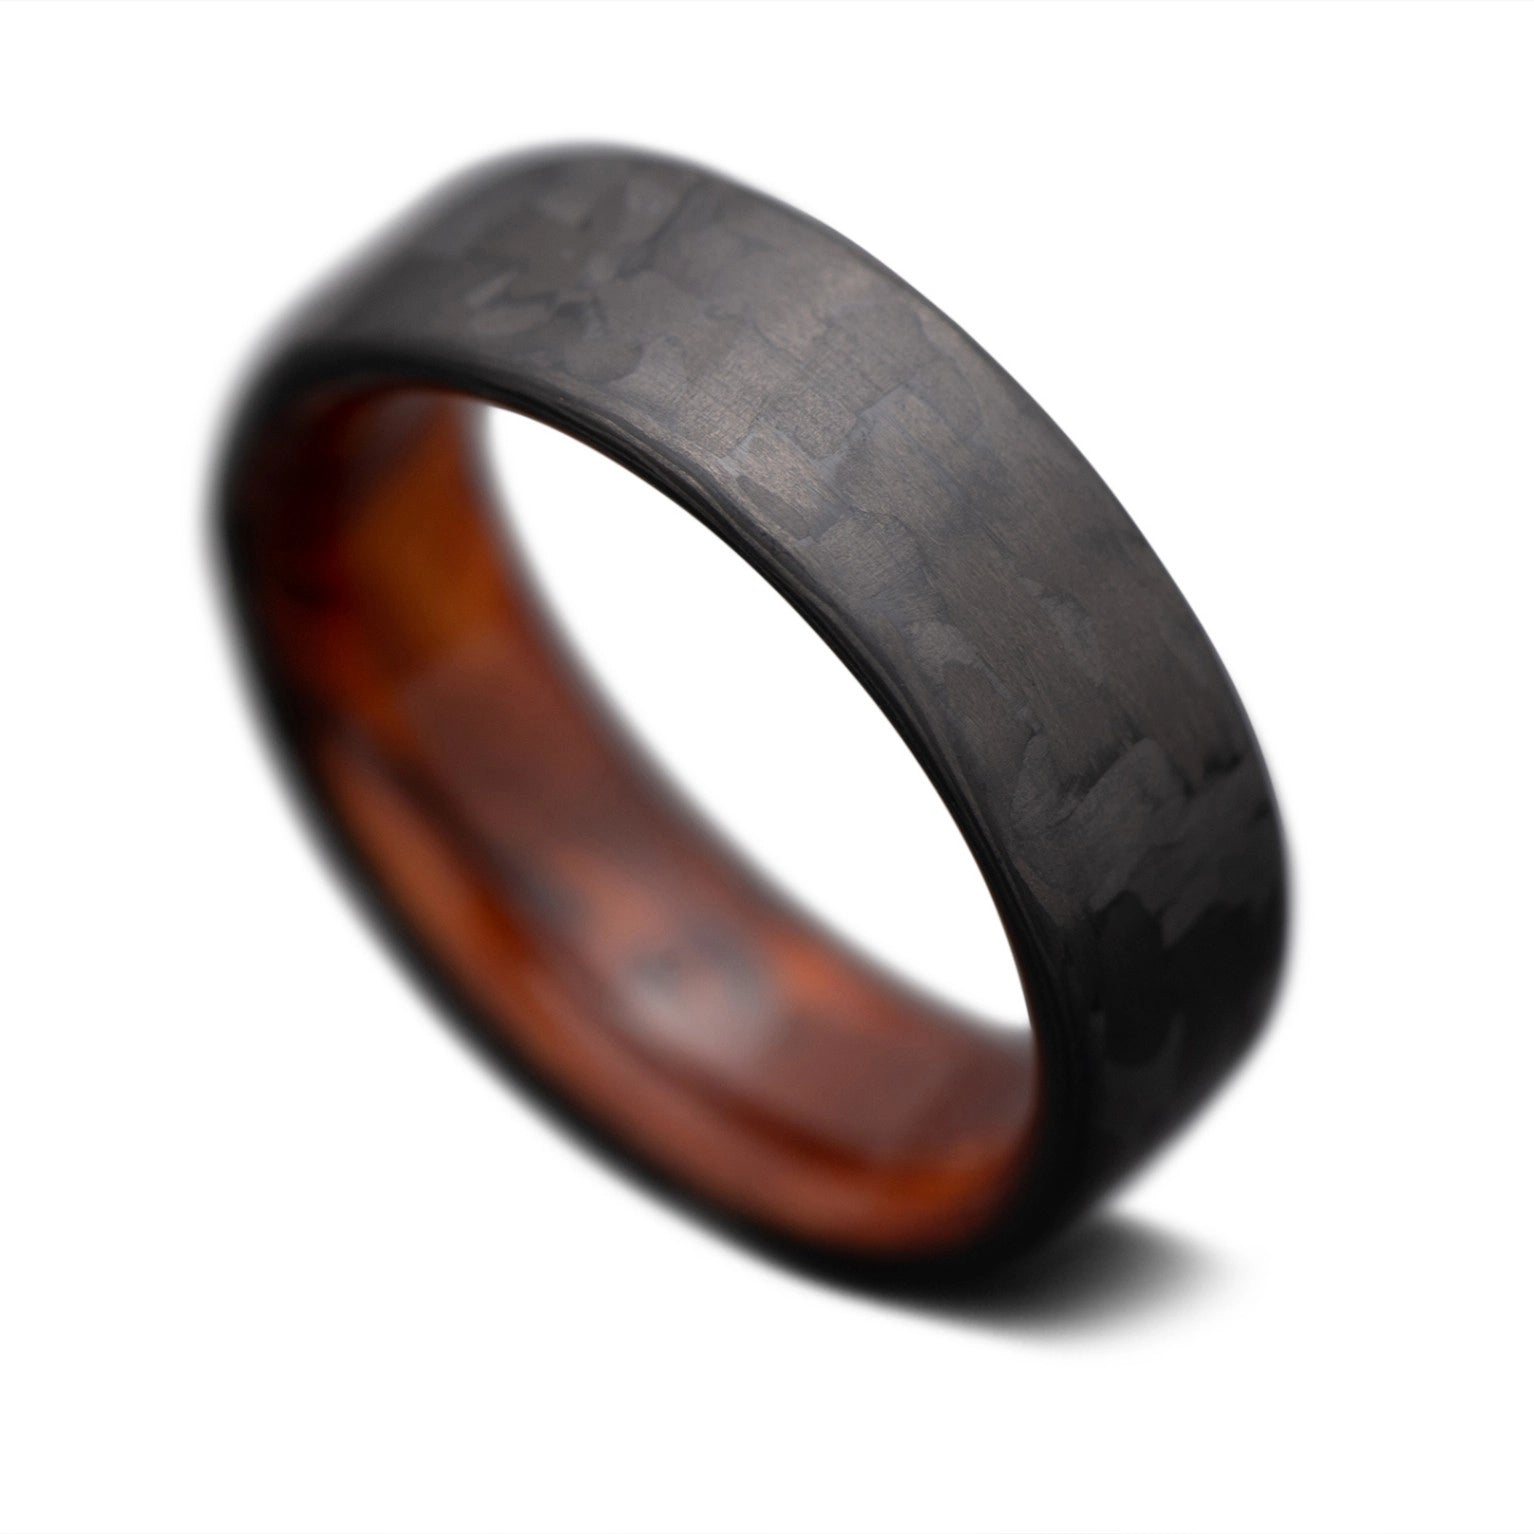 CarbonTwill Core Ring with Thuya inner sleeve, 7mm -THE PURIST